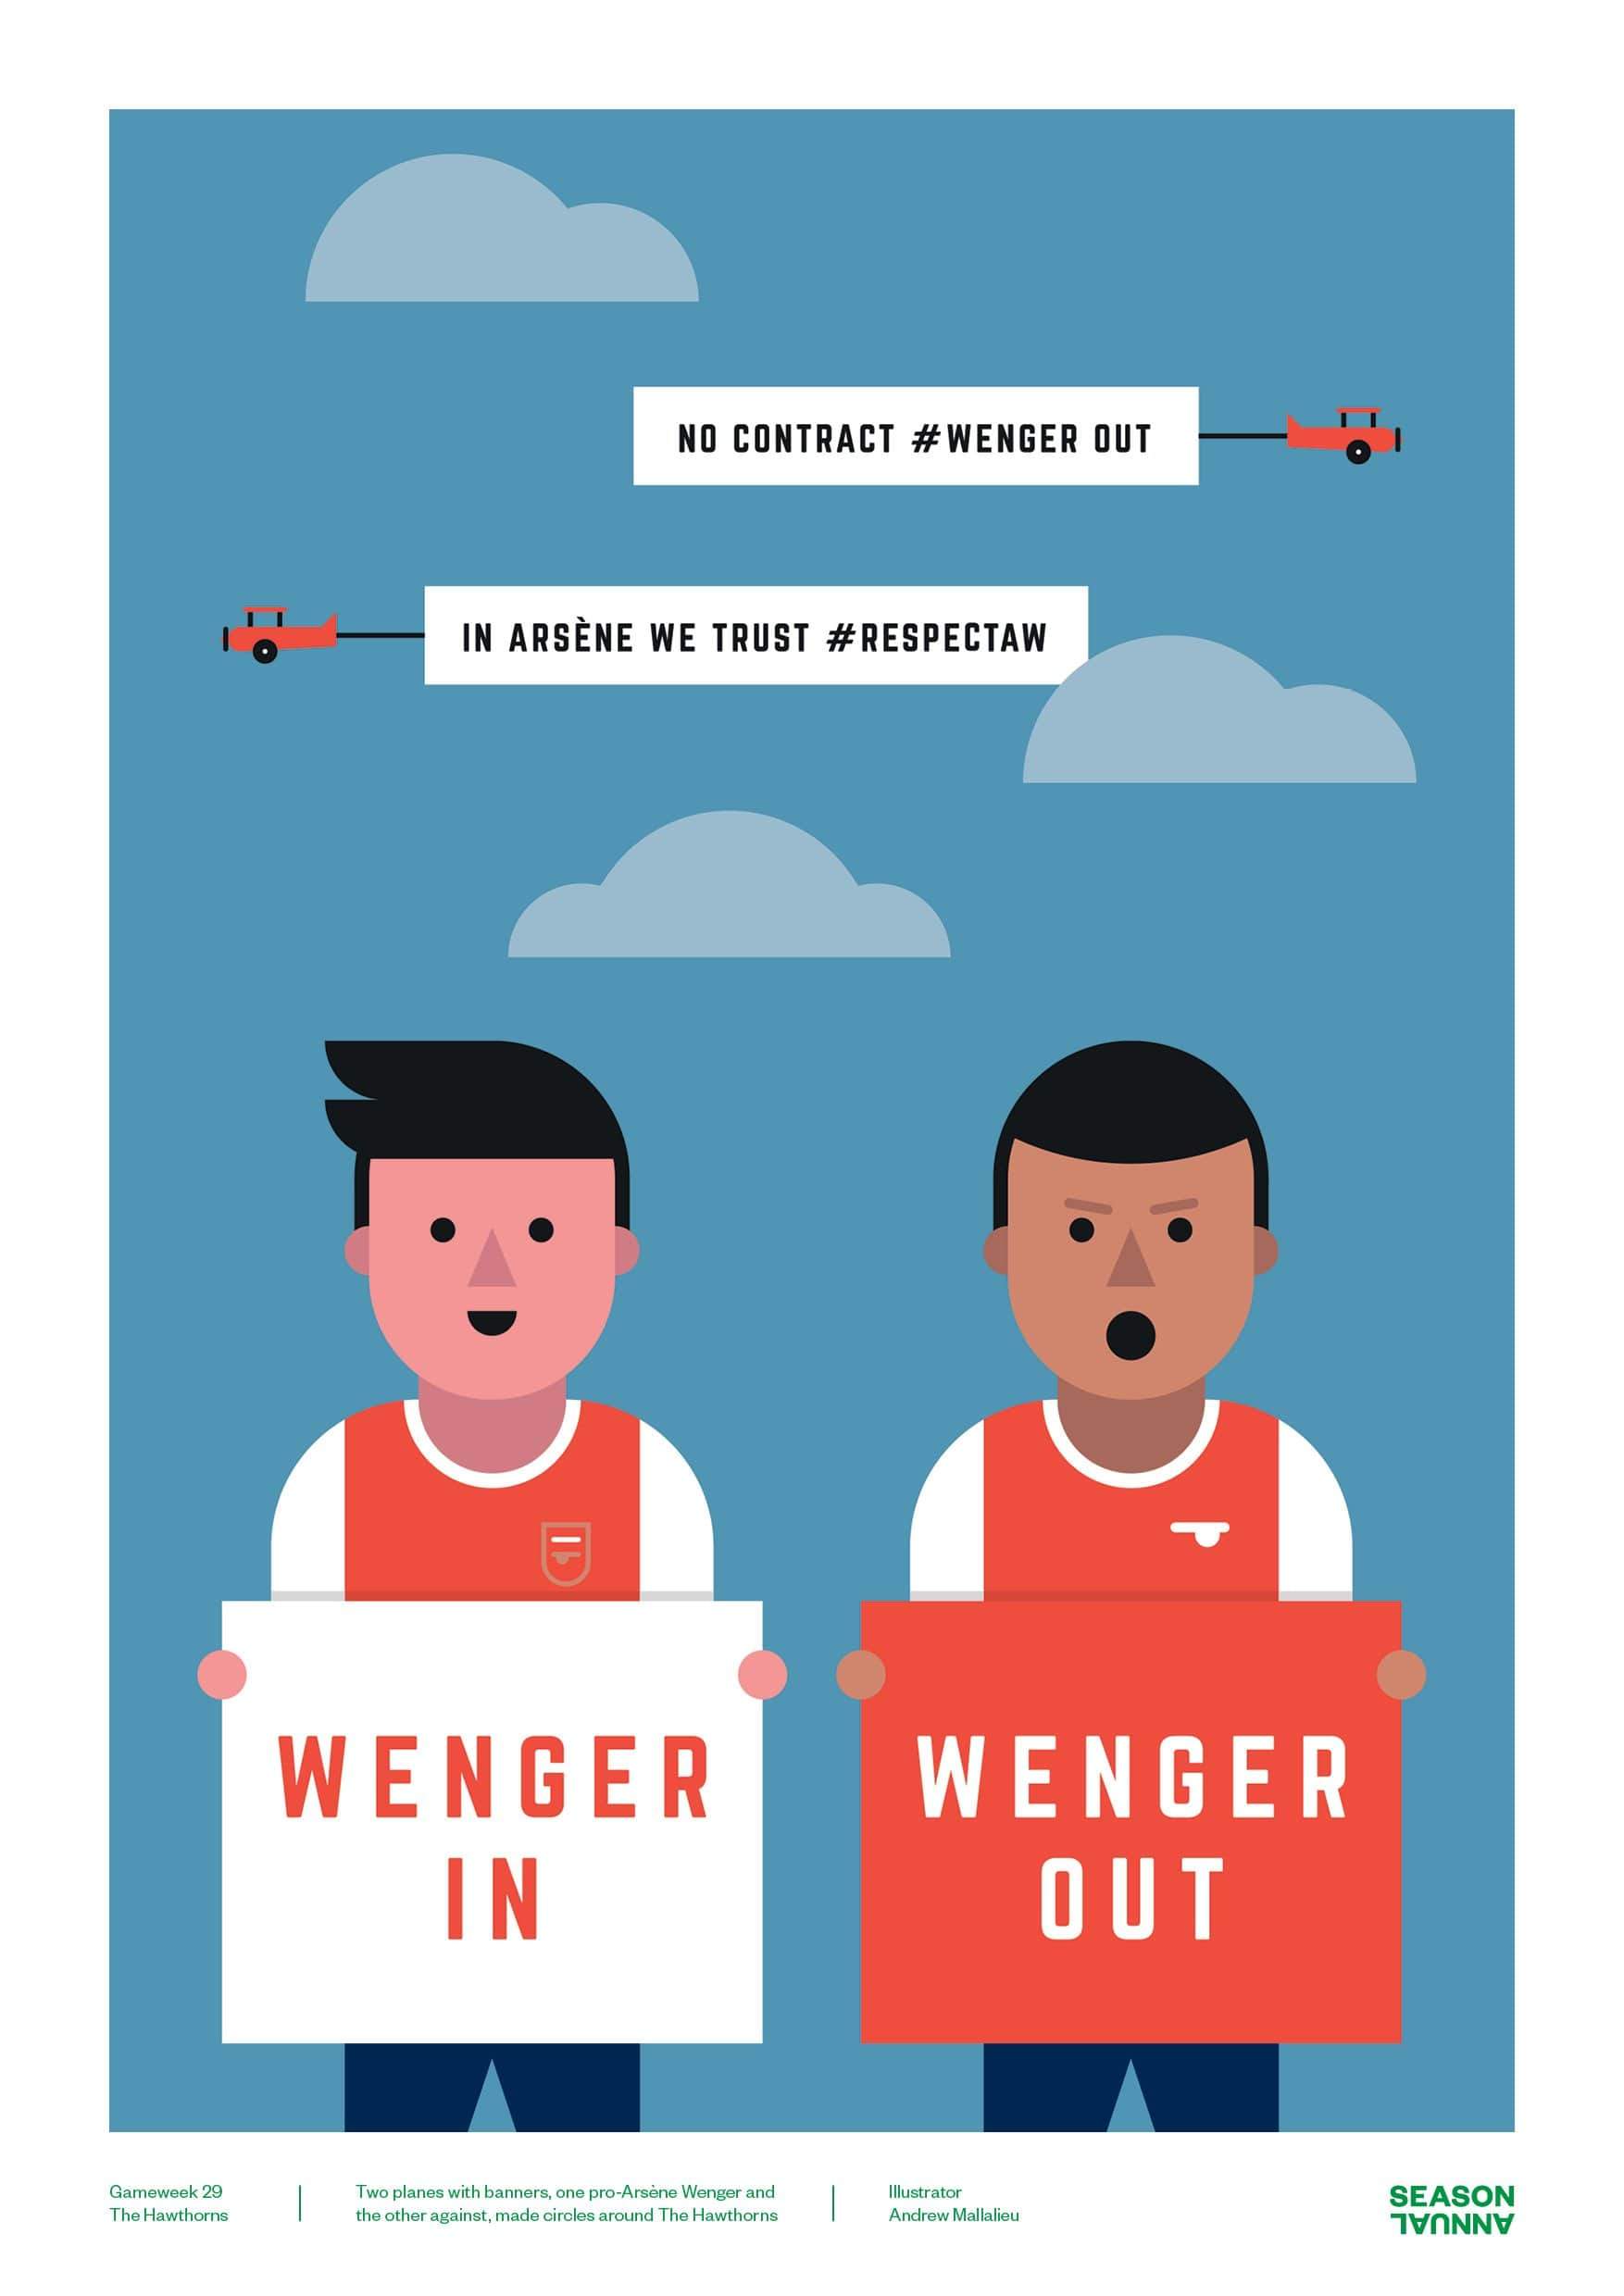 Wenger In or Wenger Out poster - Football Shirt Collective